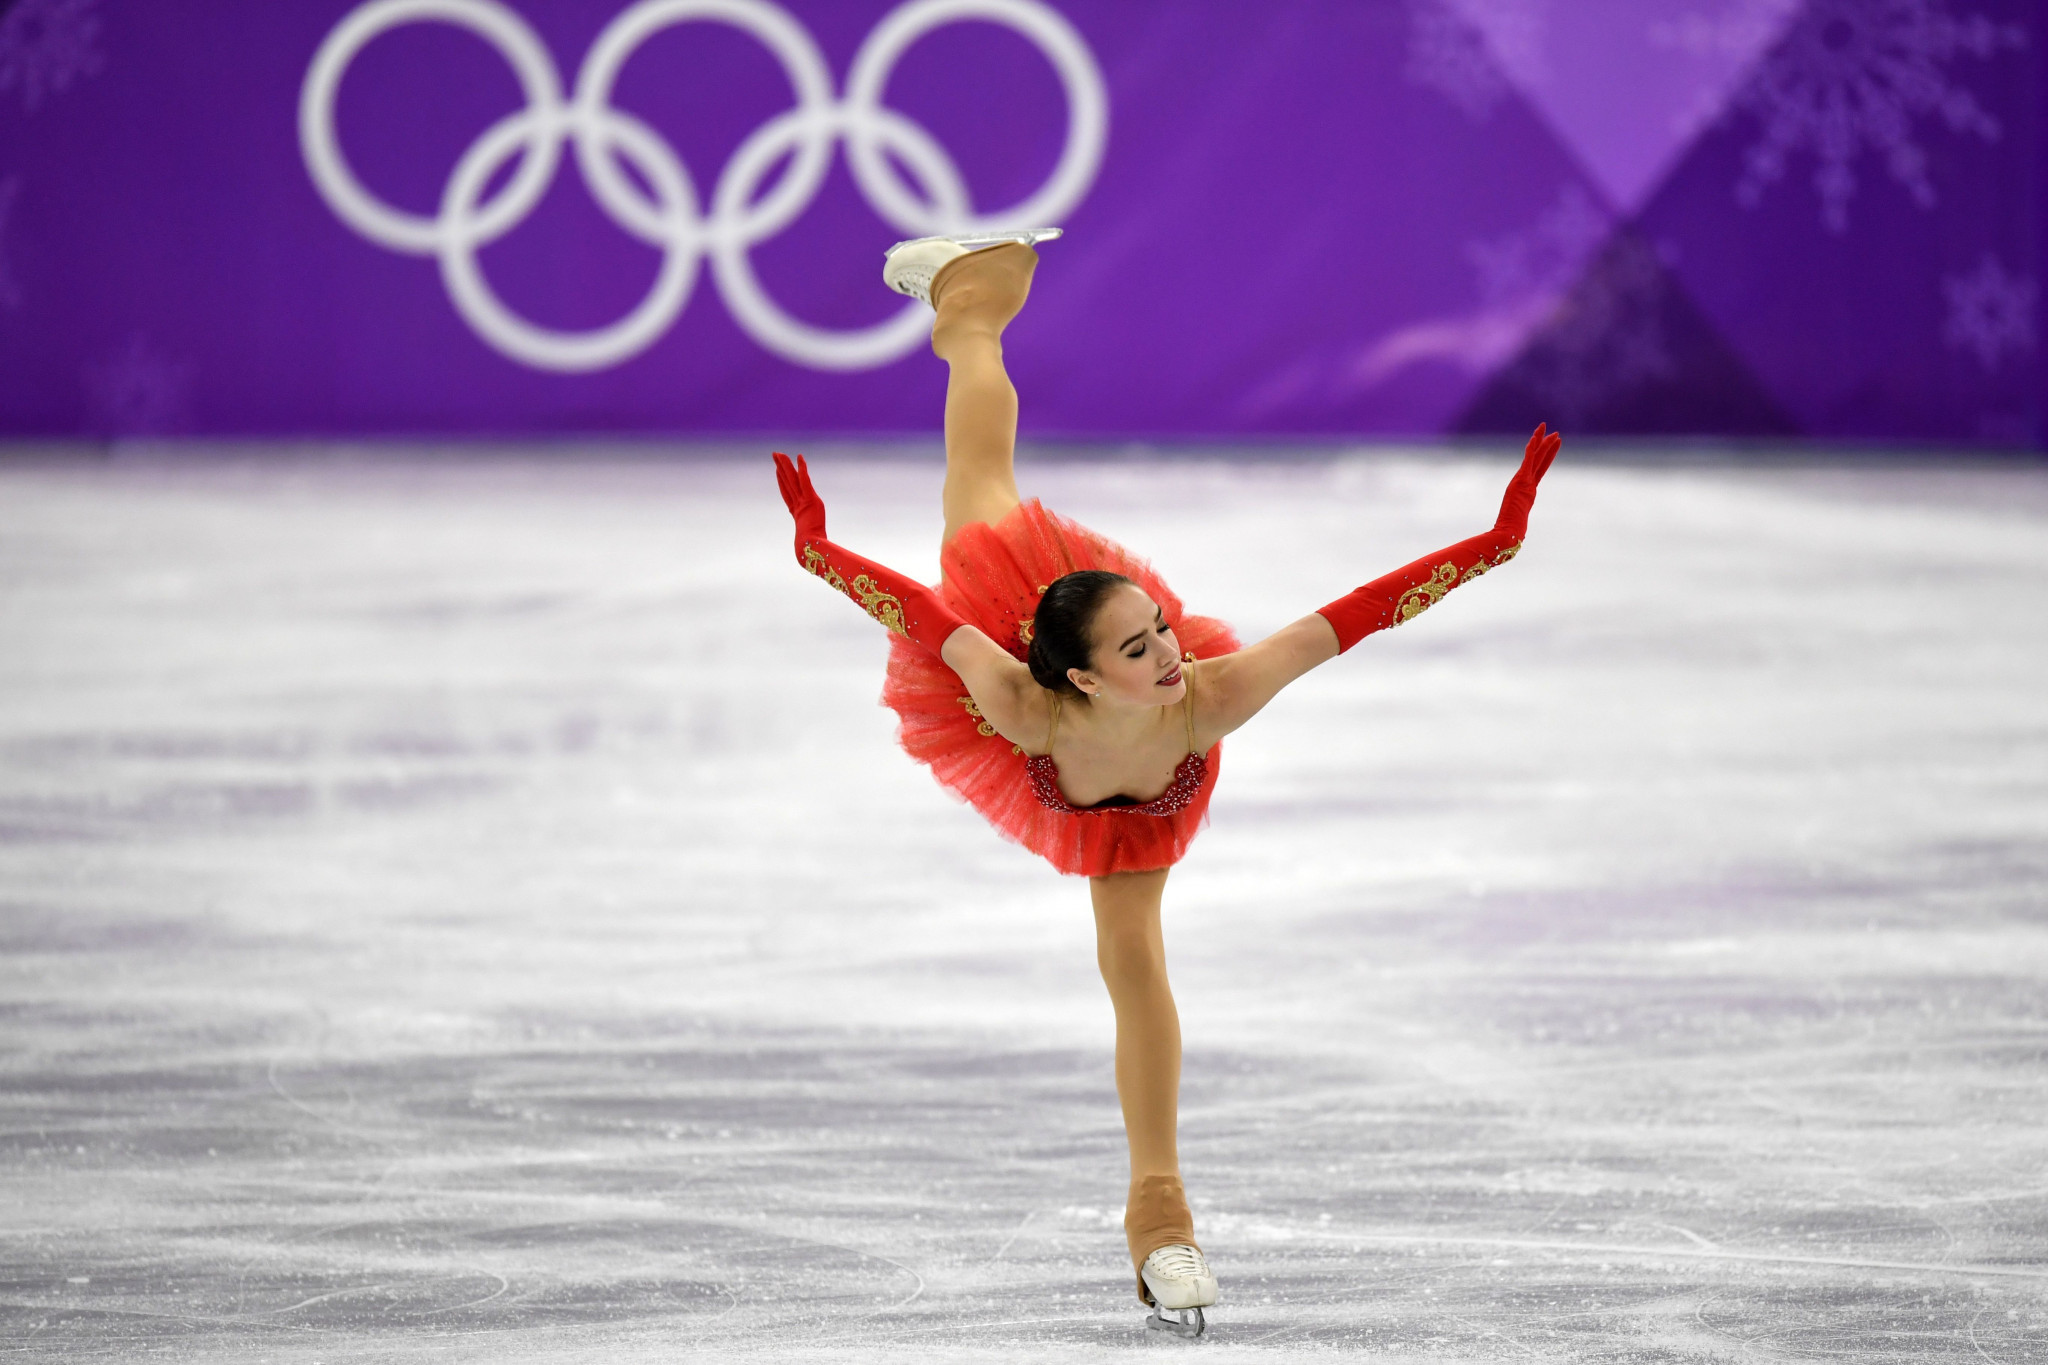 Alina Zagitova will be looking to continue her Olympic form ©Getty Images